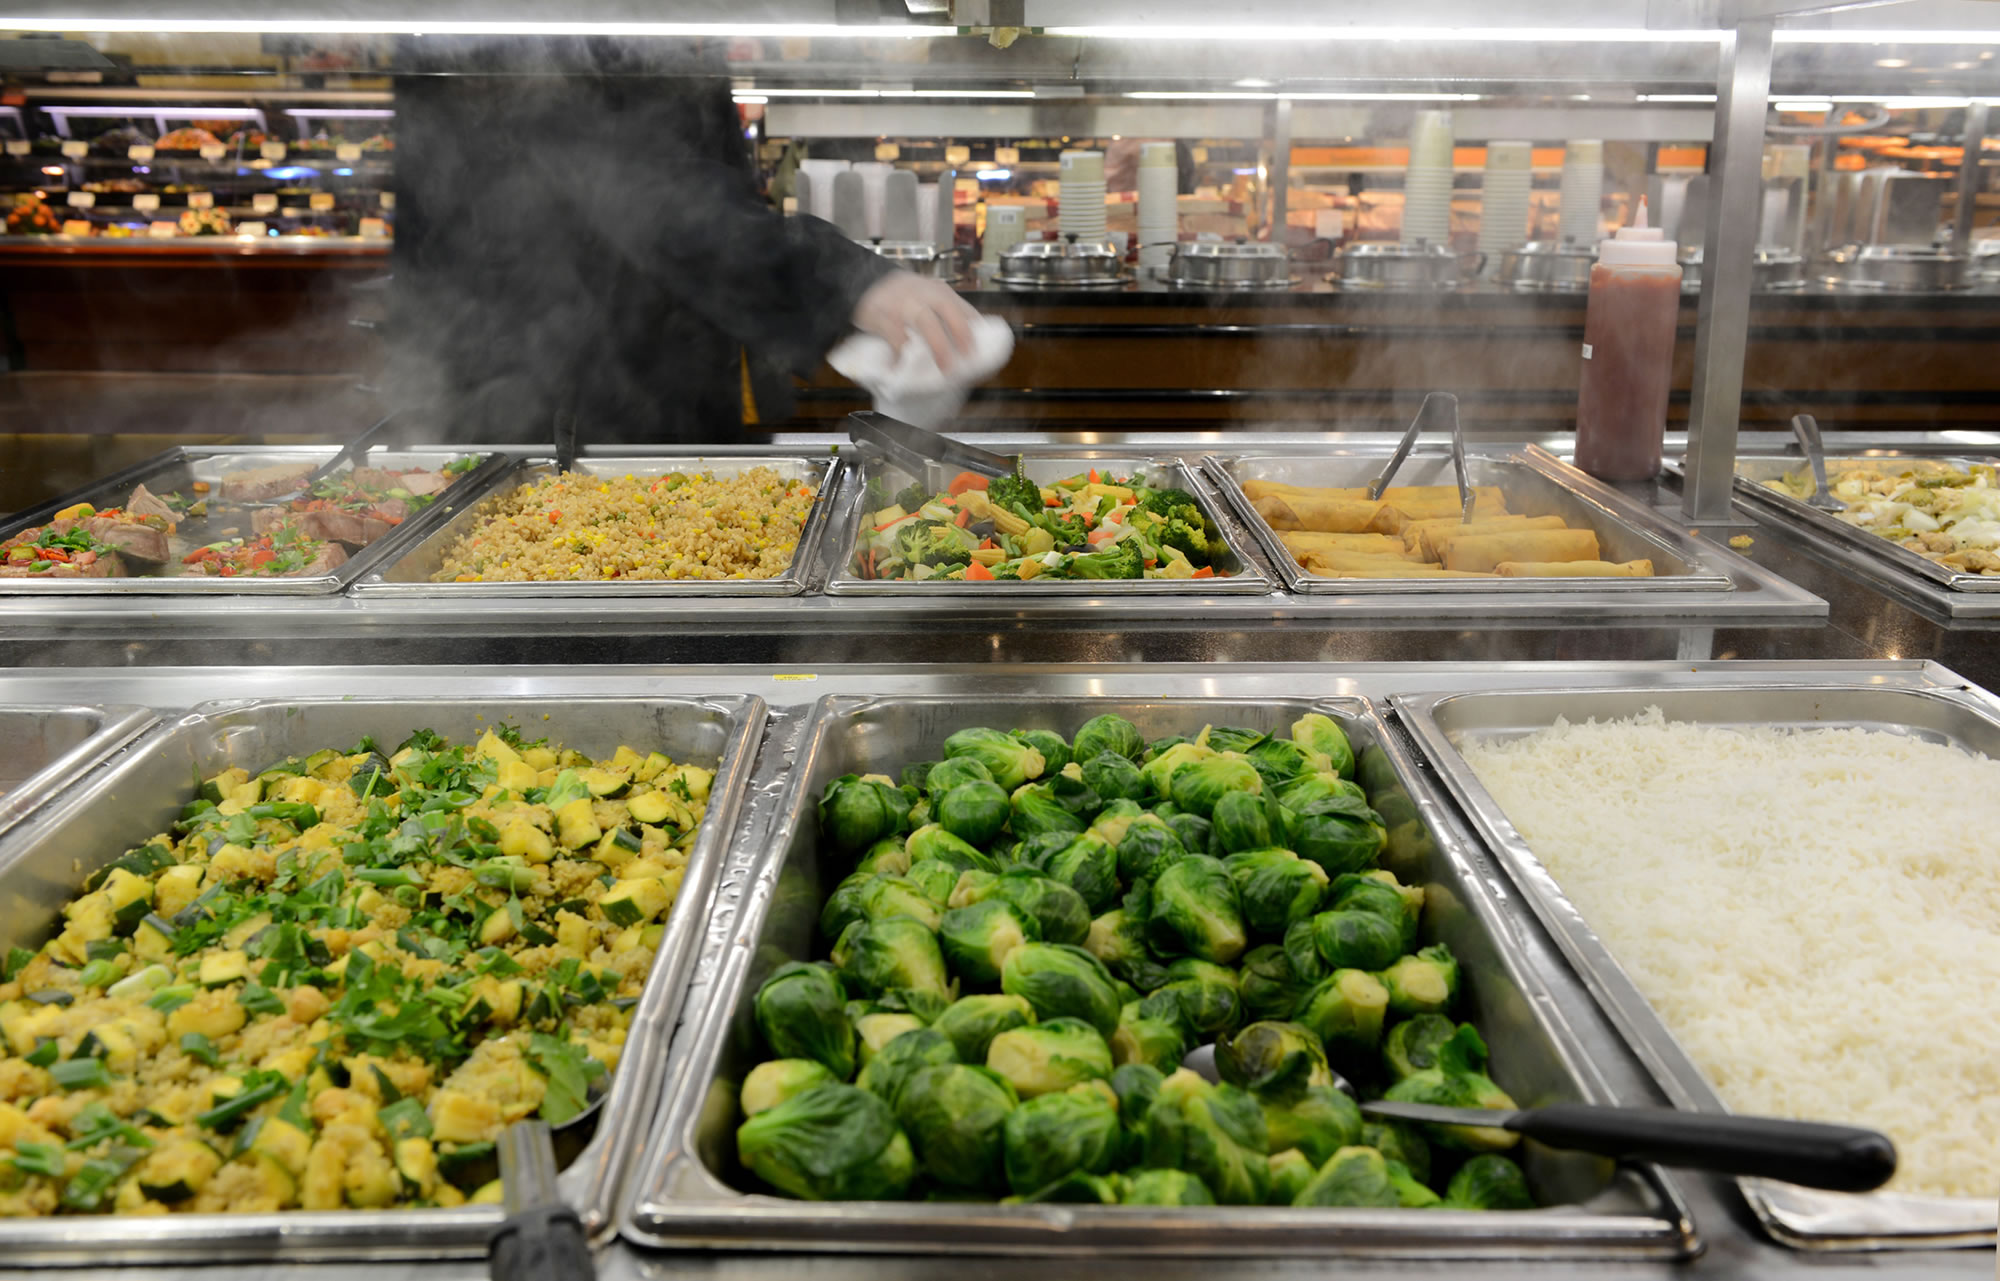 Whole Foods: How I Build a Healthy Meal at the Hot Bar